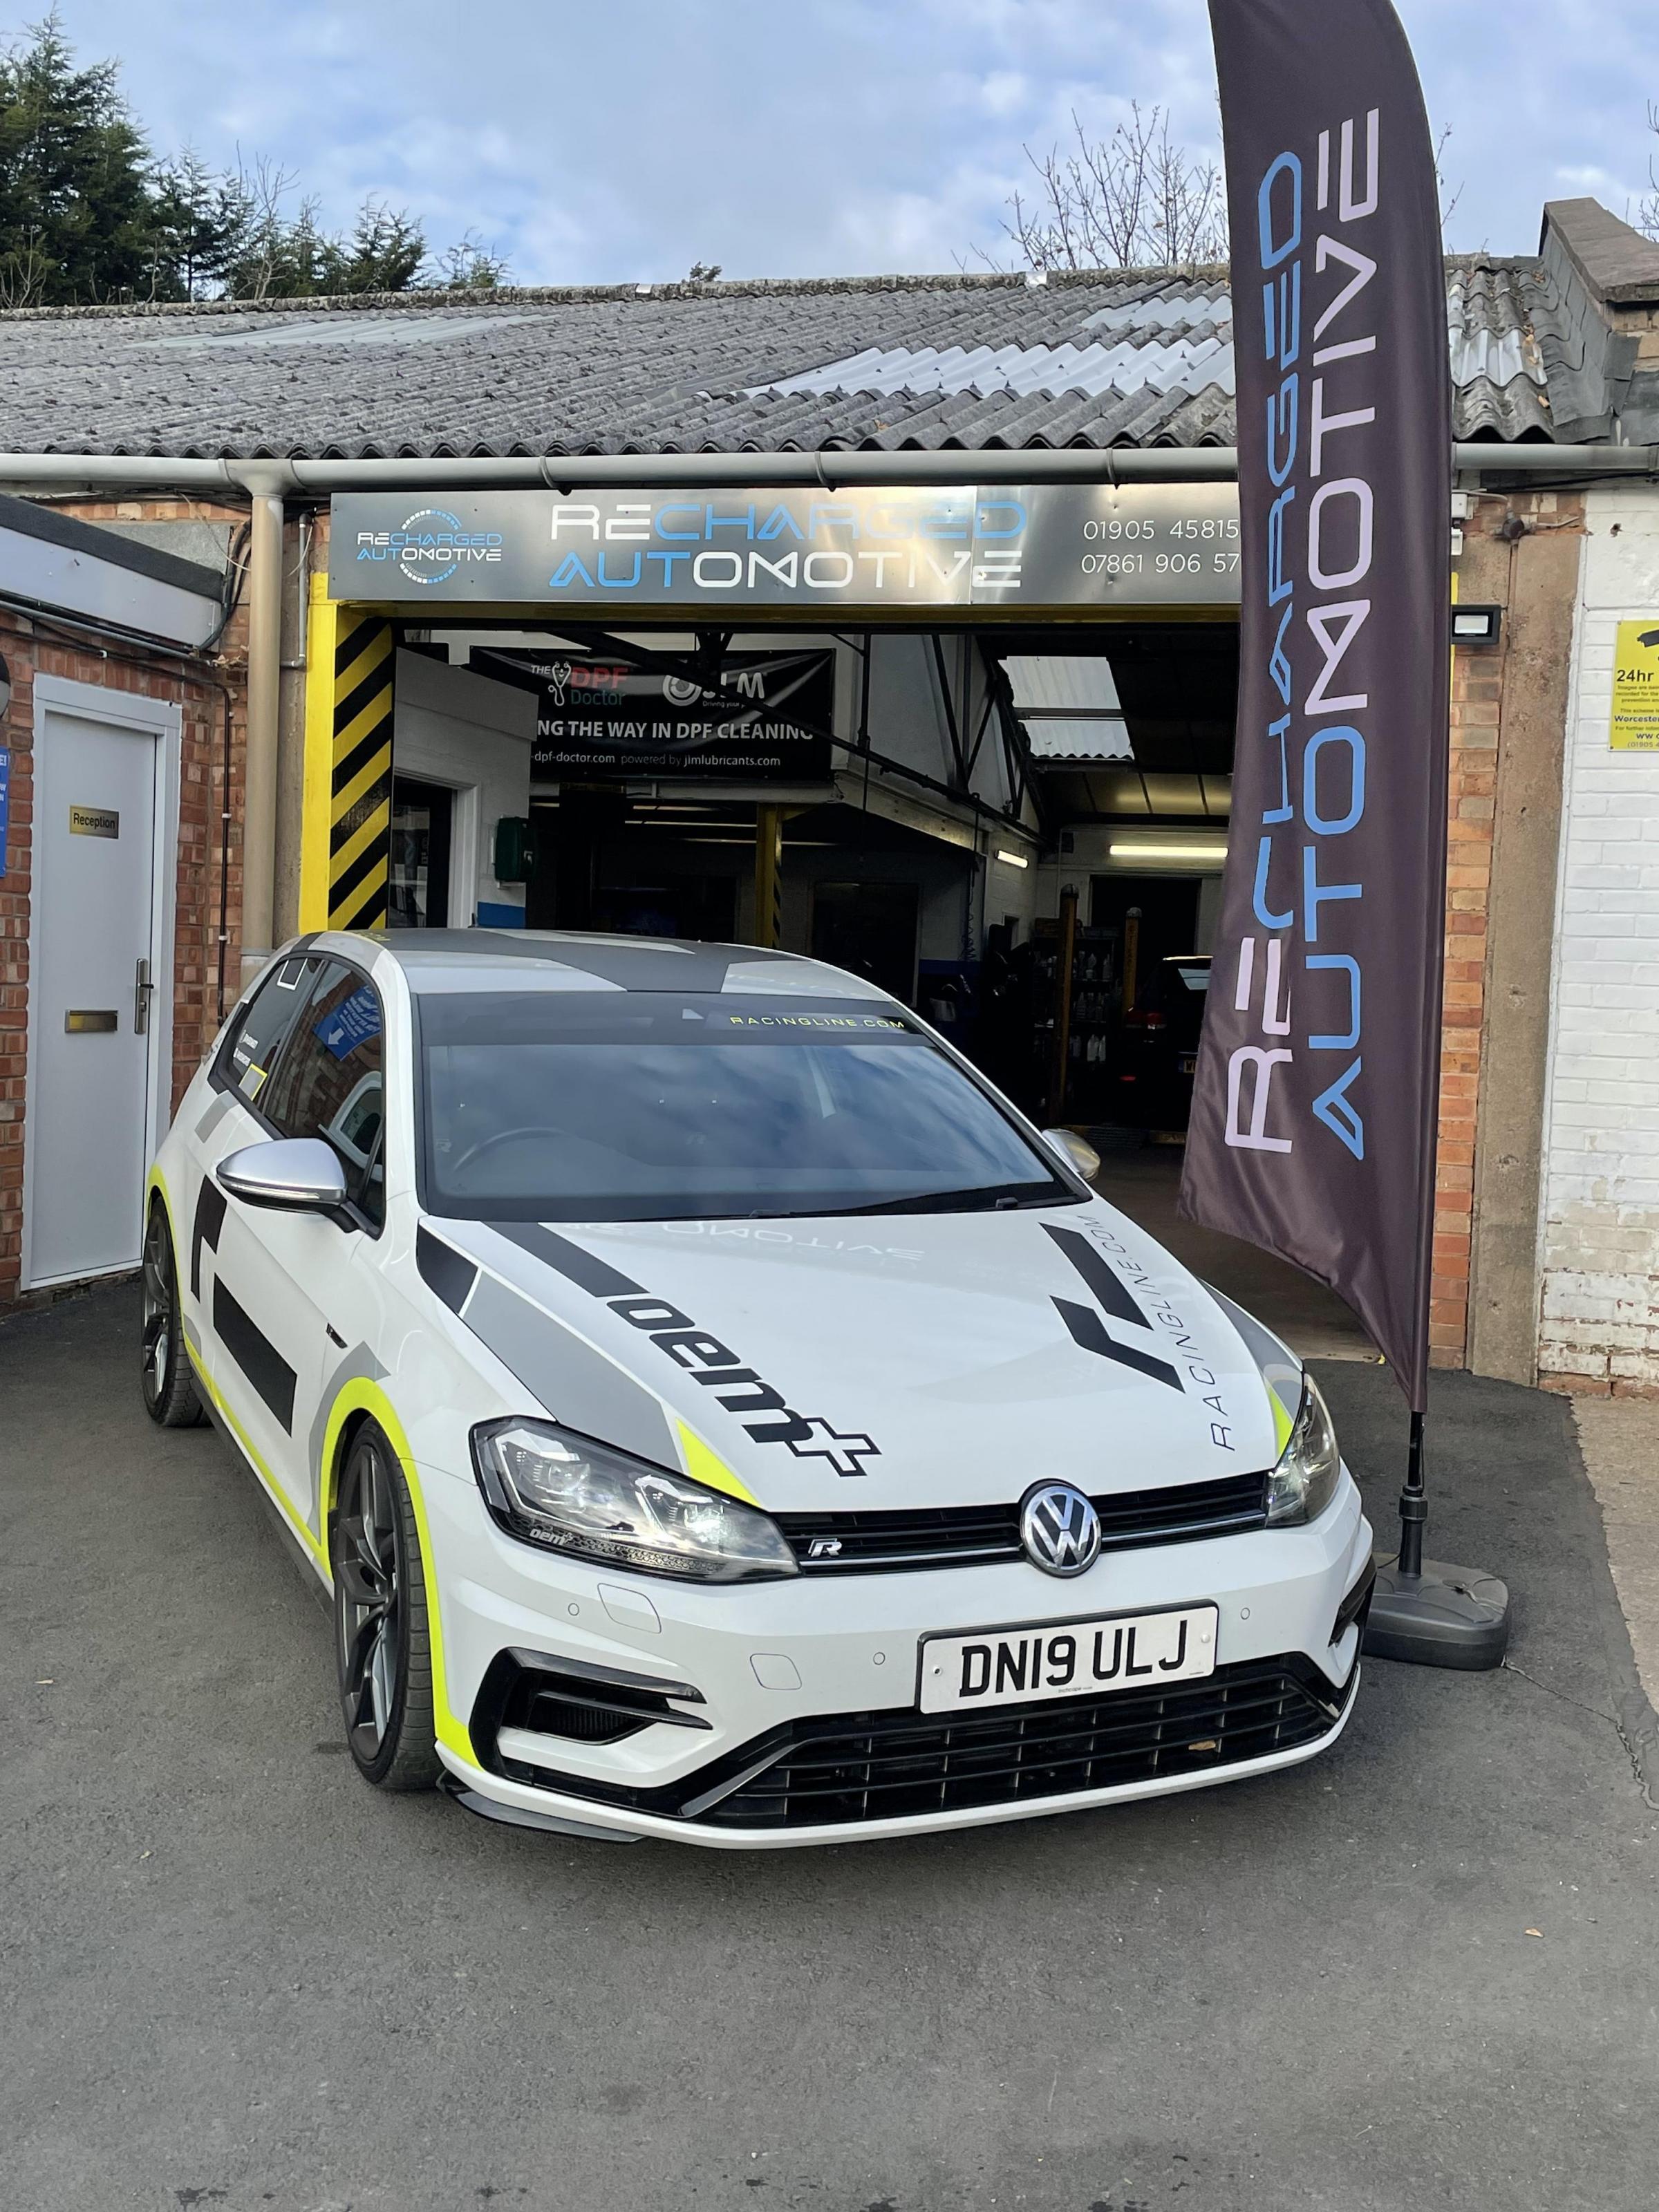 Workshop frontage with an immaculate racing line performance VW Golf